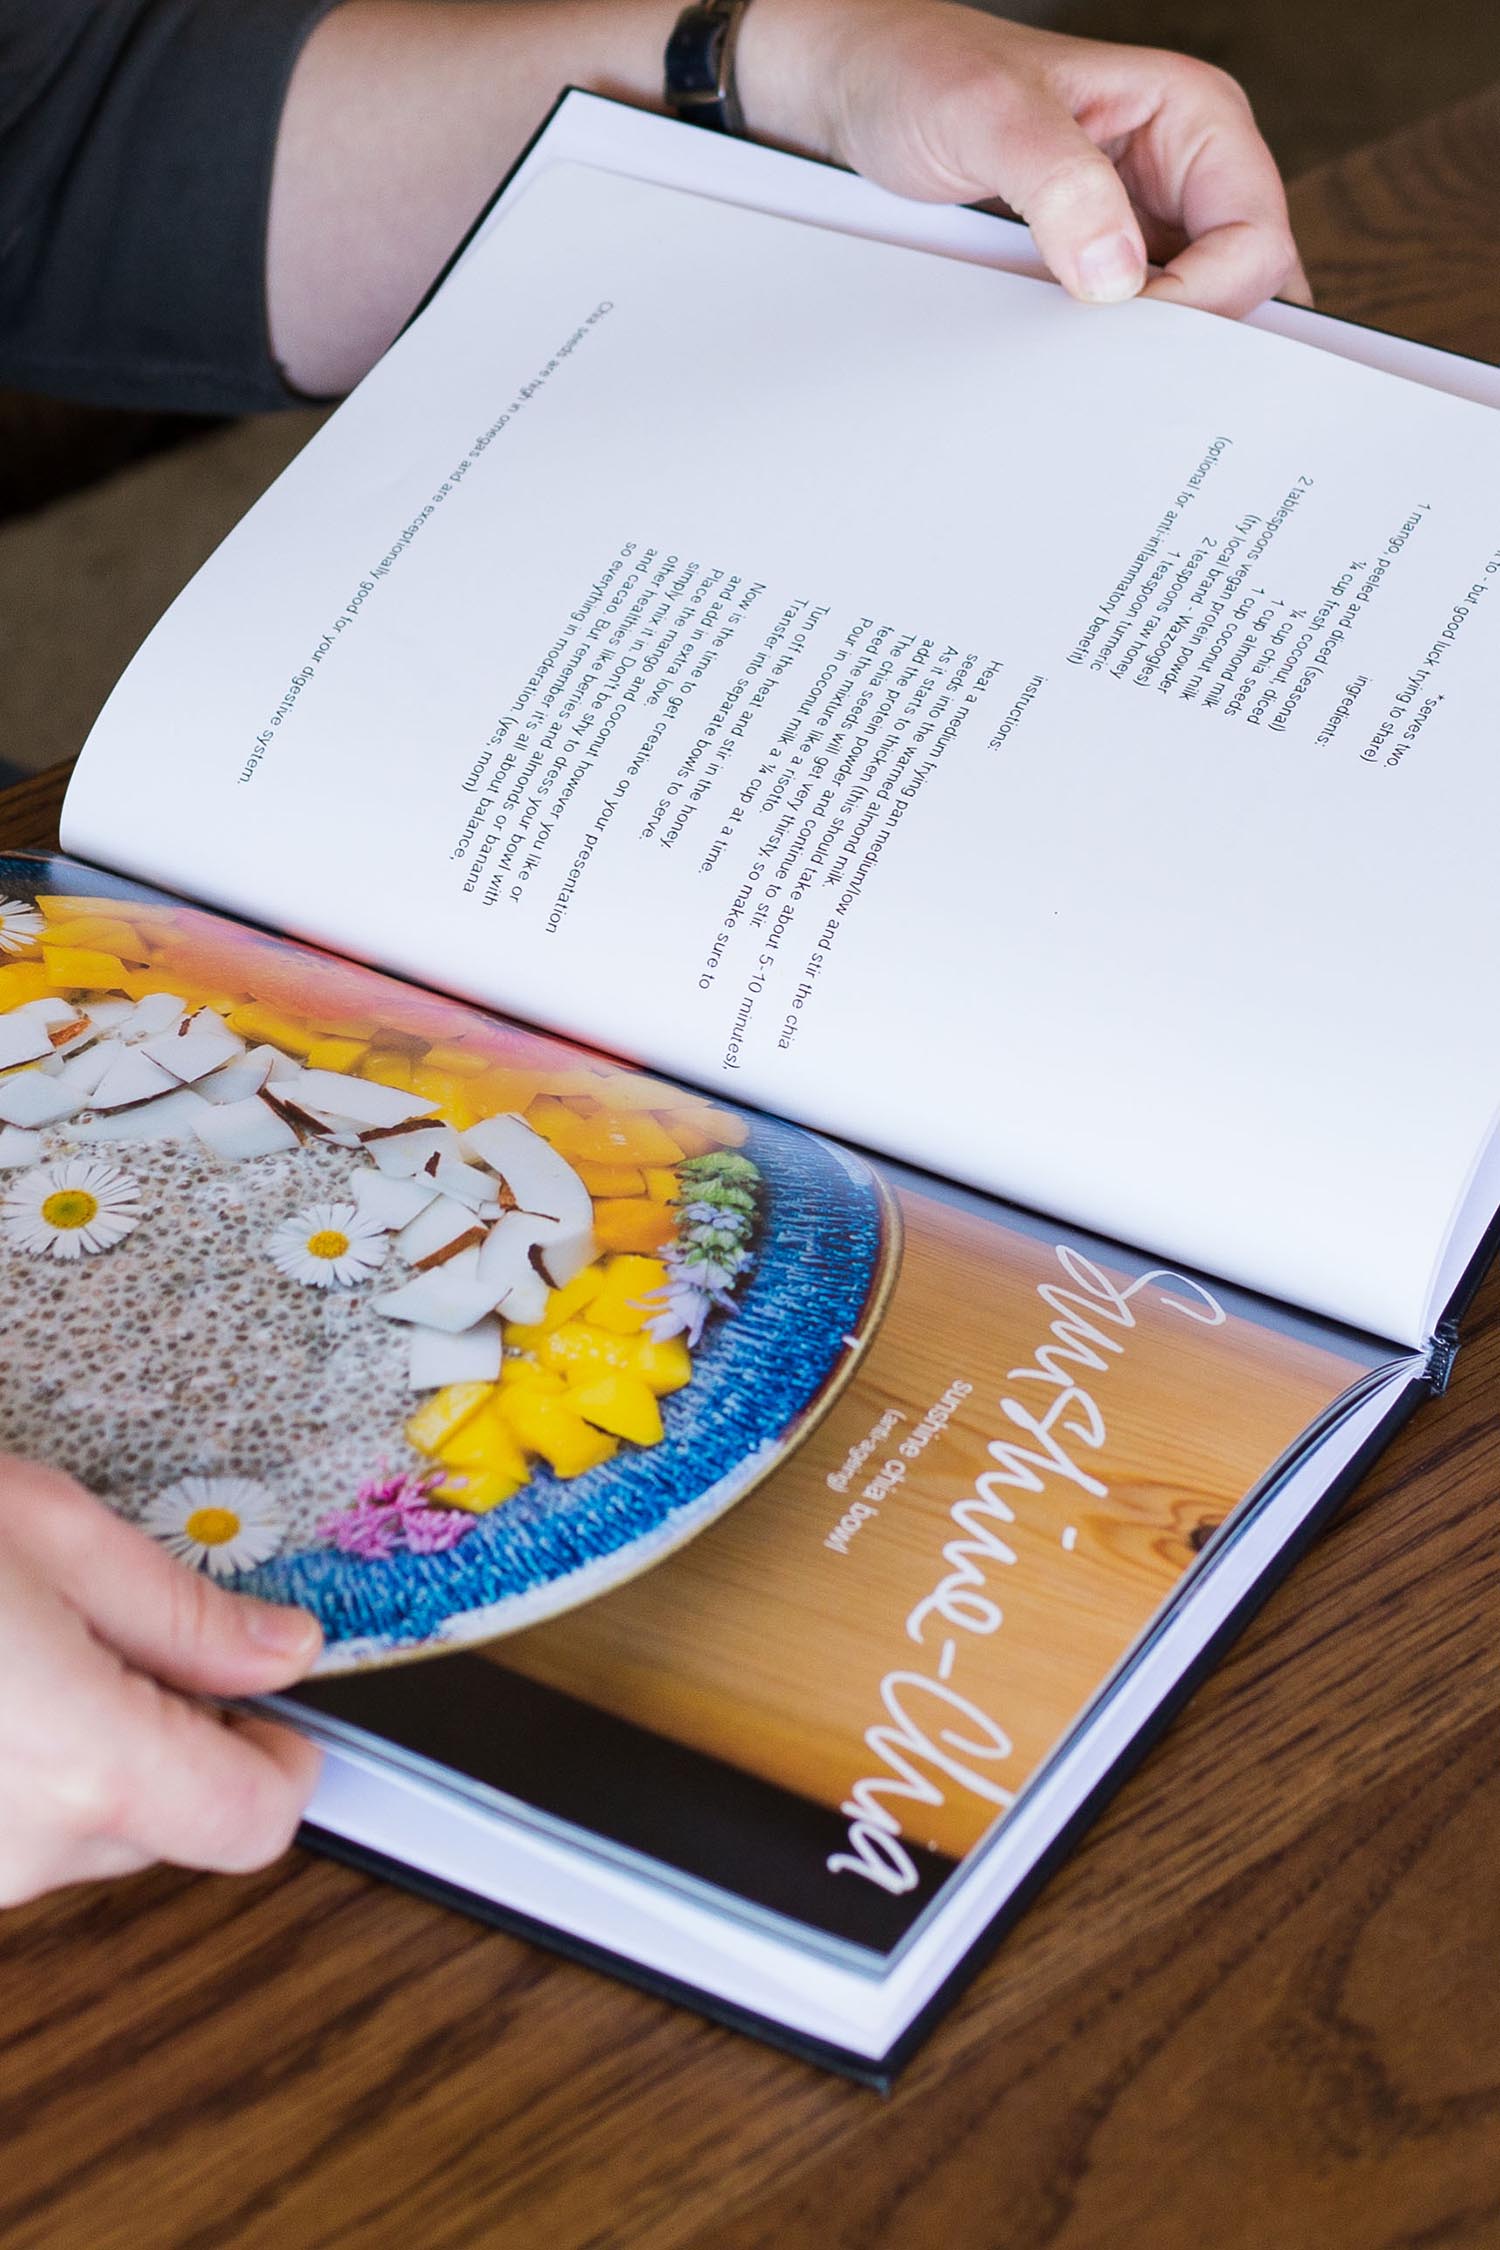 Orms Maker Series: Print Your Own Recipe Book - The Orms Photographic Blog